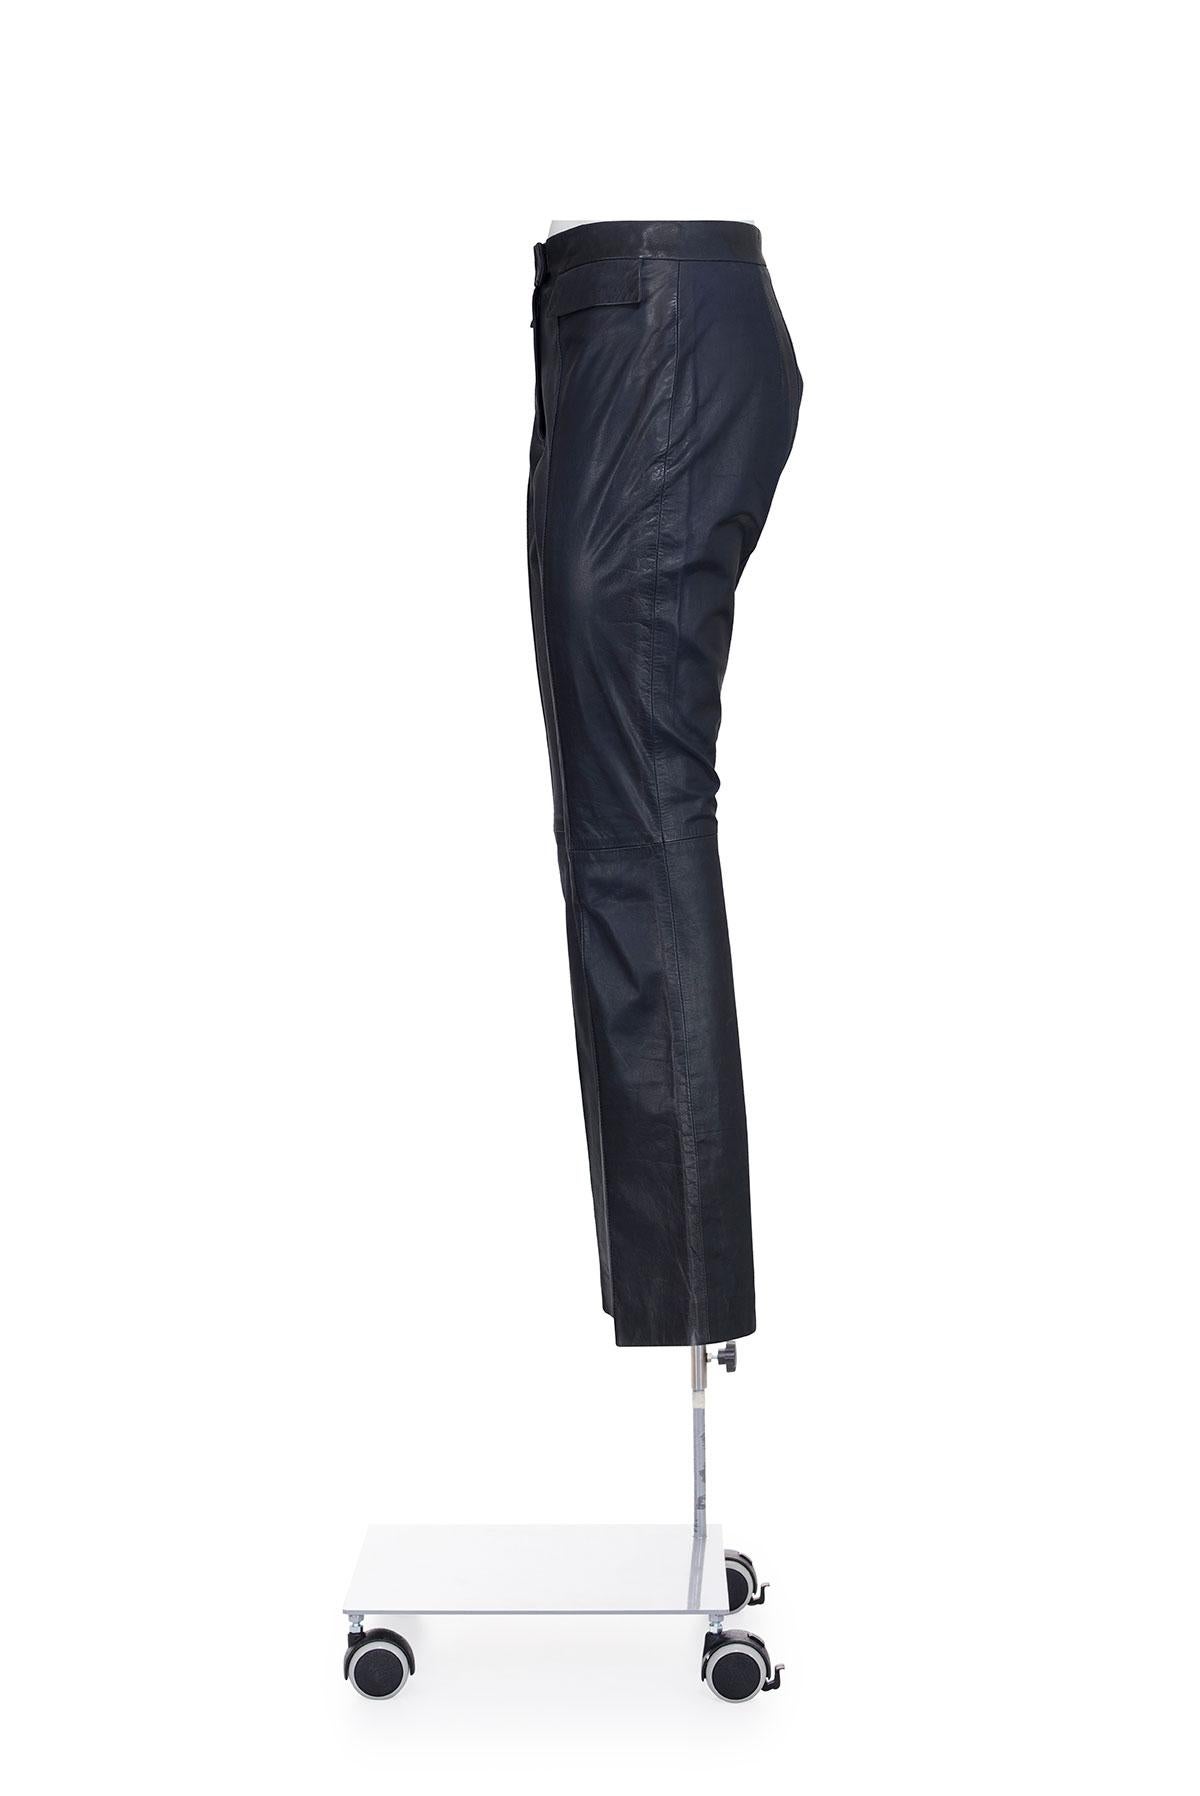 JOHN GALLIANO SS 1991 Iconic Leather Flared Trousers In Good Condition For Sale In Milano, MILANO